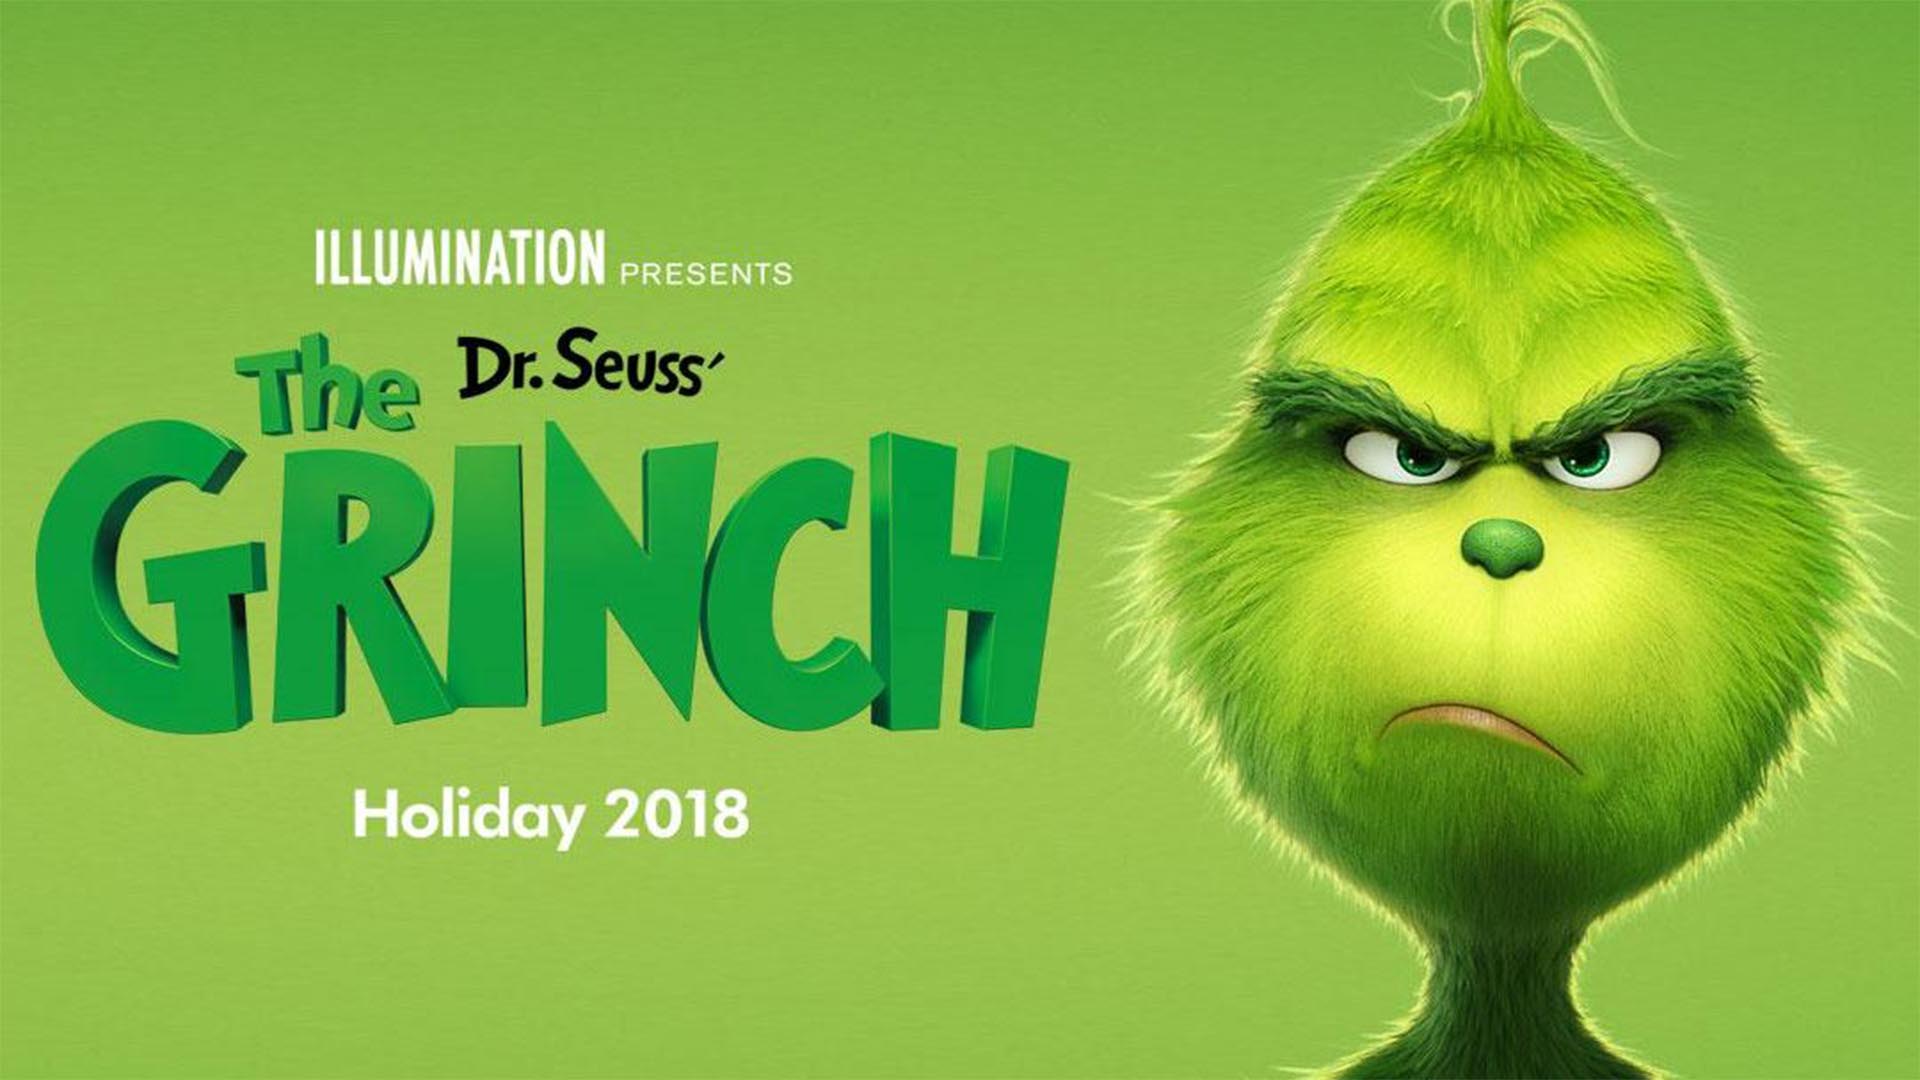 Who Did It Better How The Grinch Stole Christmas Big Picture Film Club